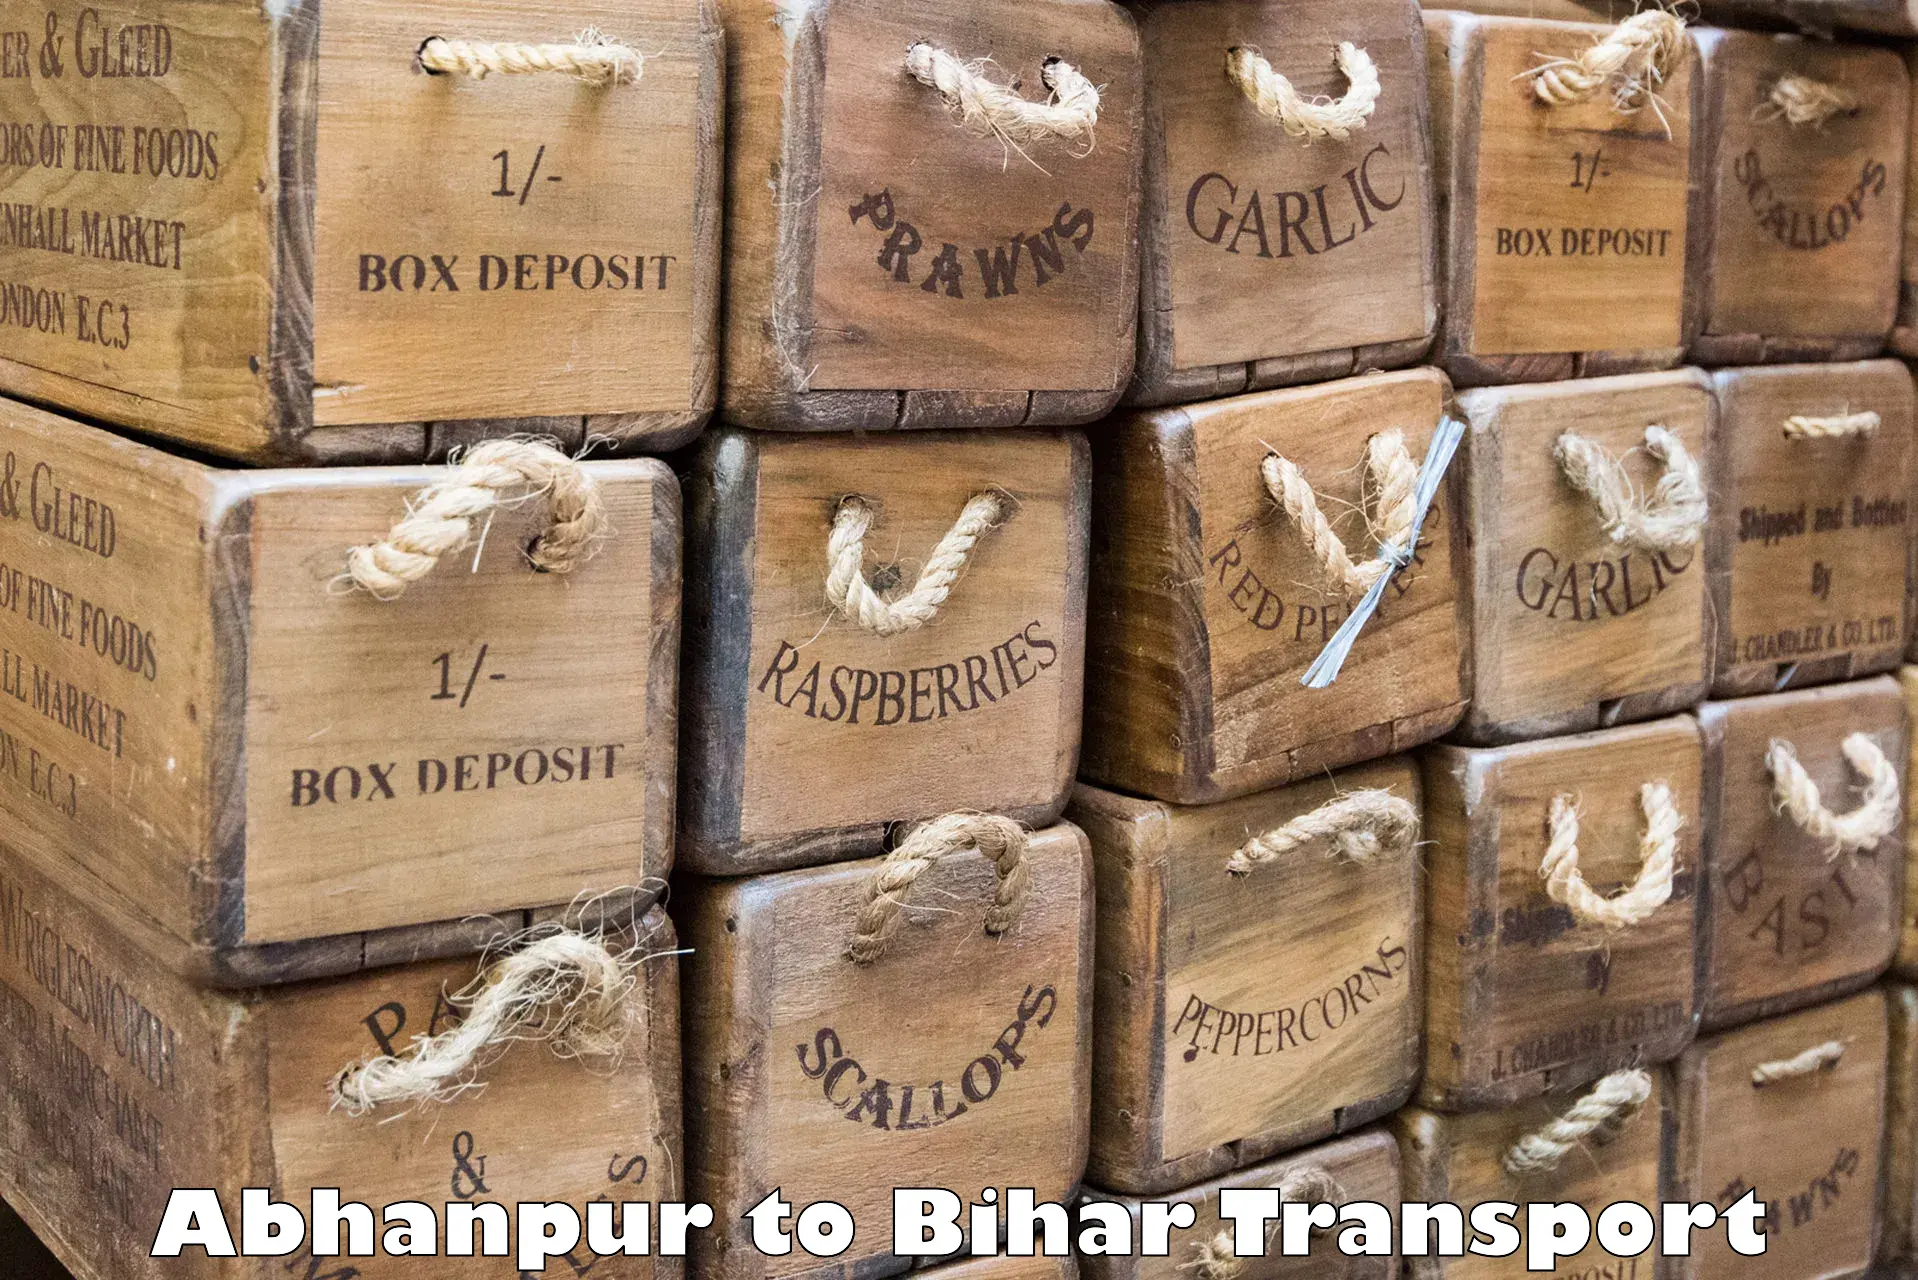 Inland transportation services Abhanpur to Patna